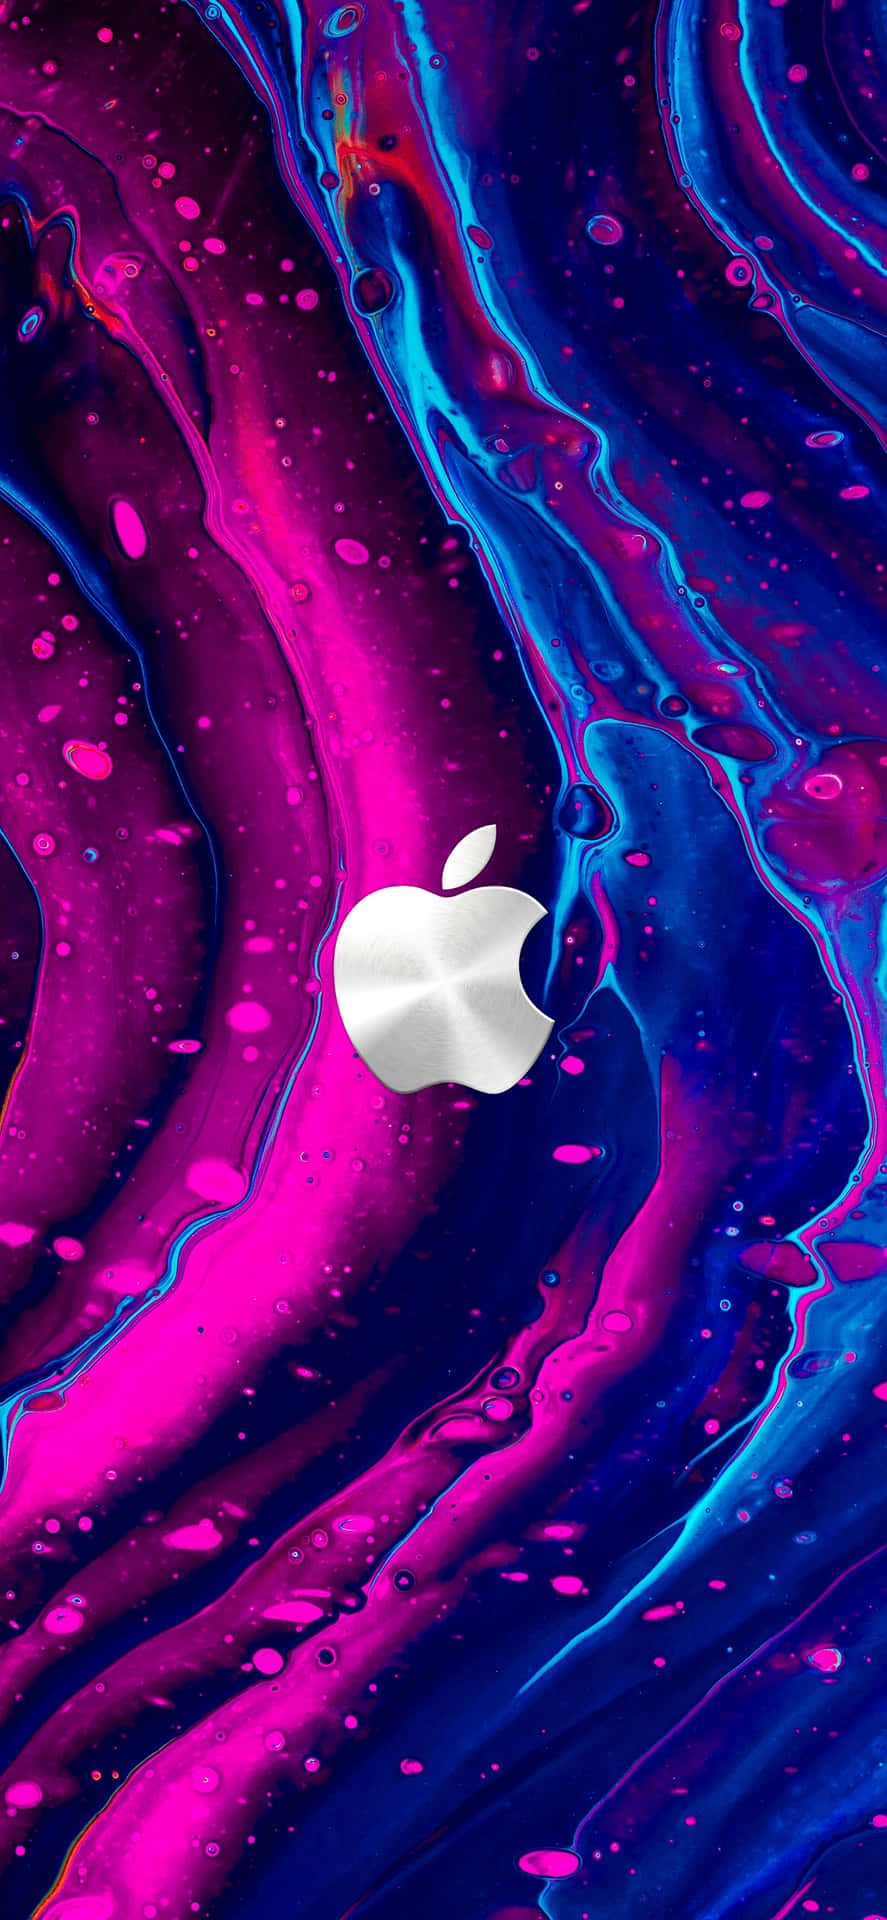 Stunning High Definition Apple Logo On Liquid Background For Iphone